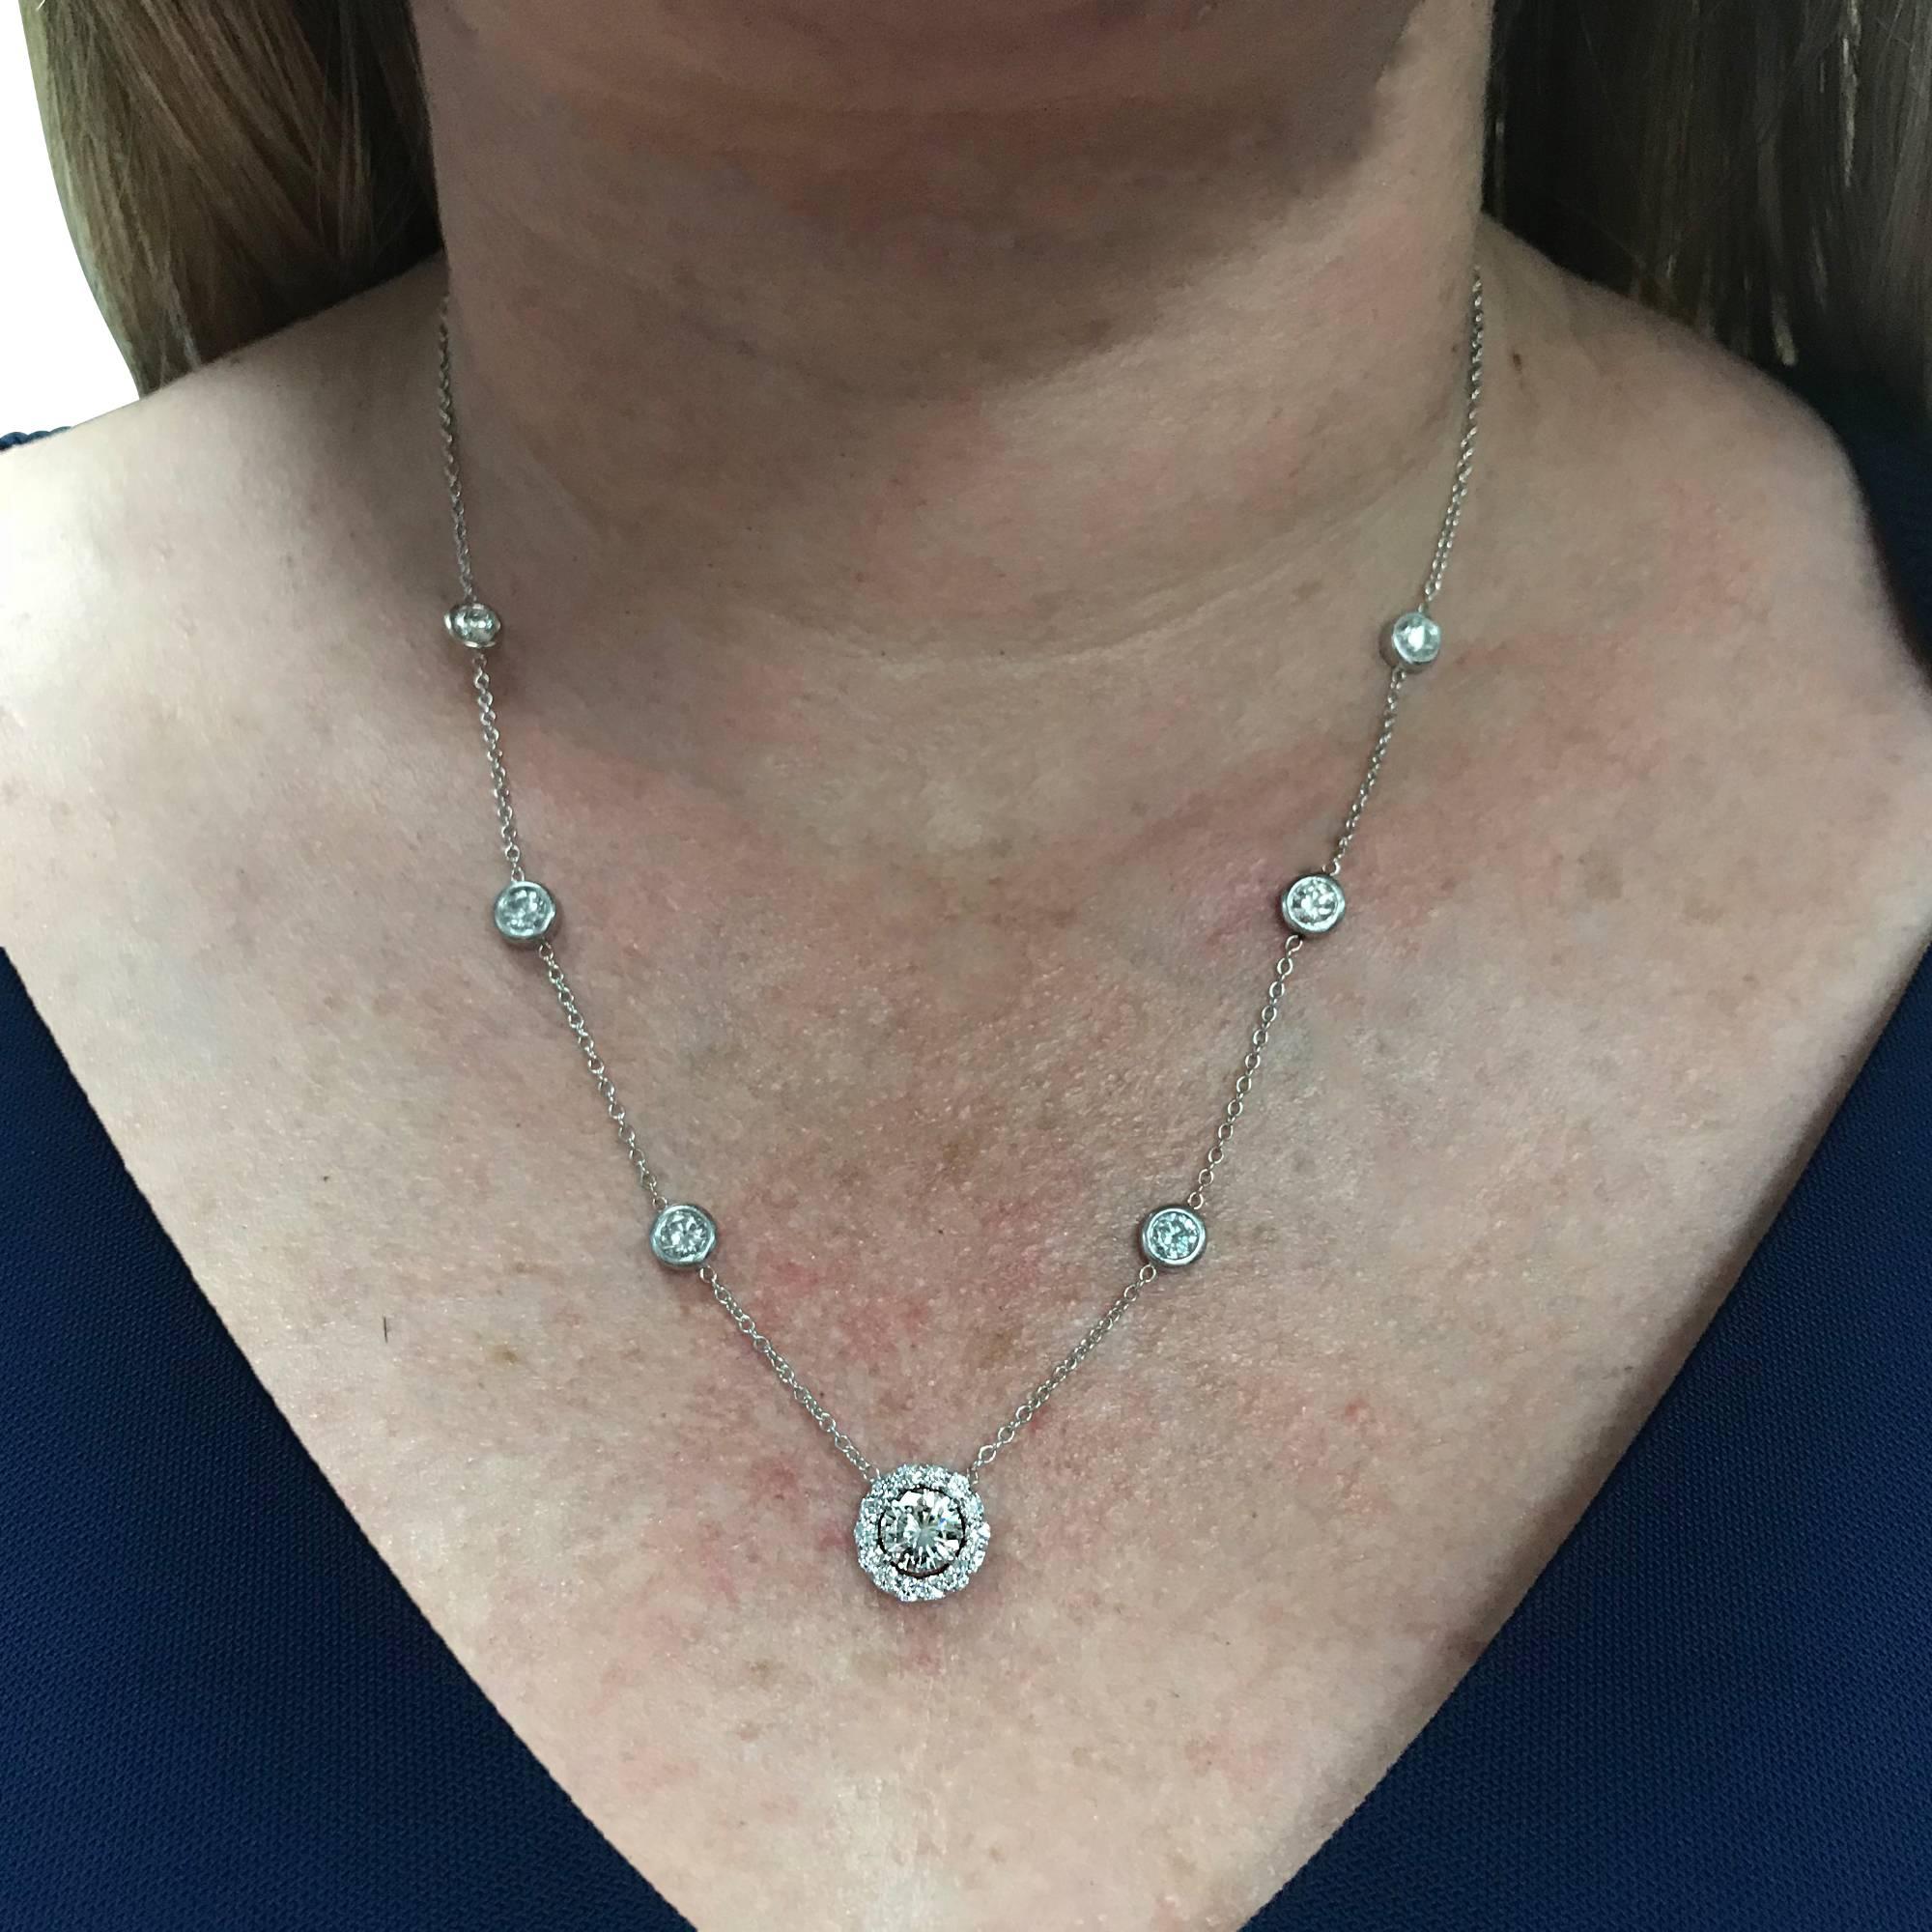 Stunning 18K White gold necklace containing a round brilliant cut diamond weighing approximately 1.12cts K color and VS clarity surrounded by 15 round brilliant cut diamonds weighing approximately .48cts J color and VS-SI clarity. The necklace is